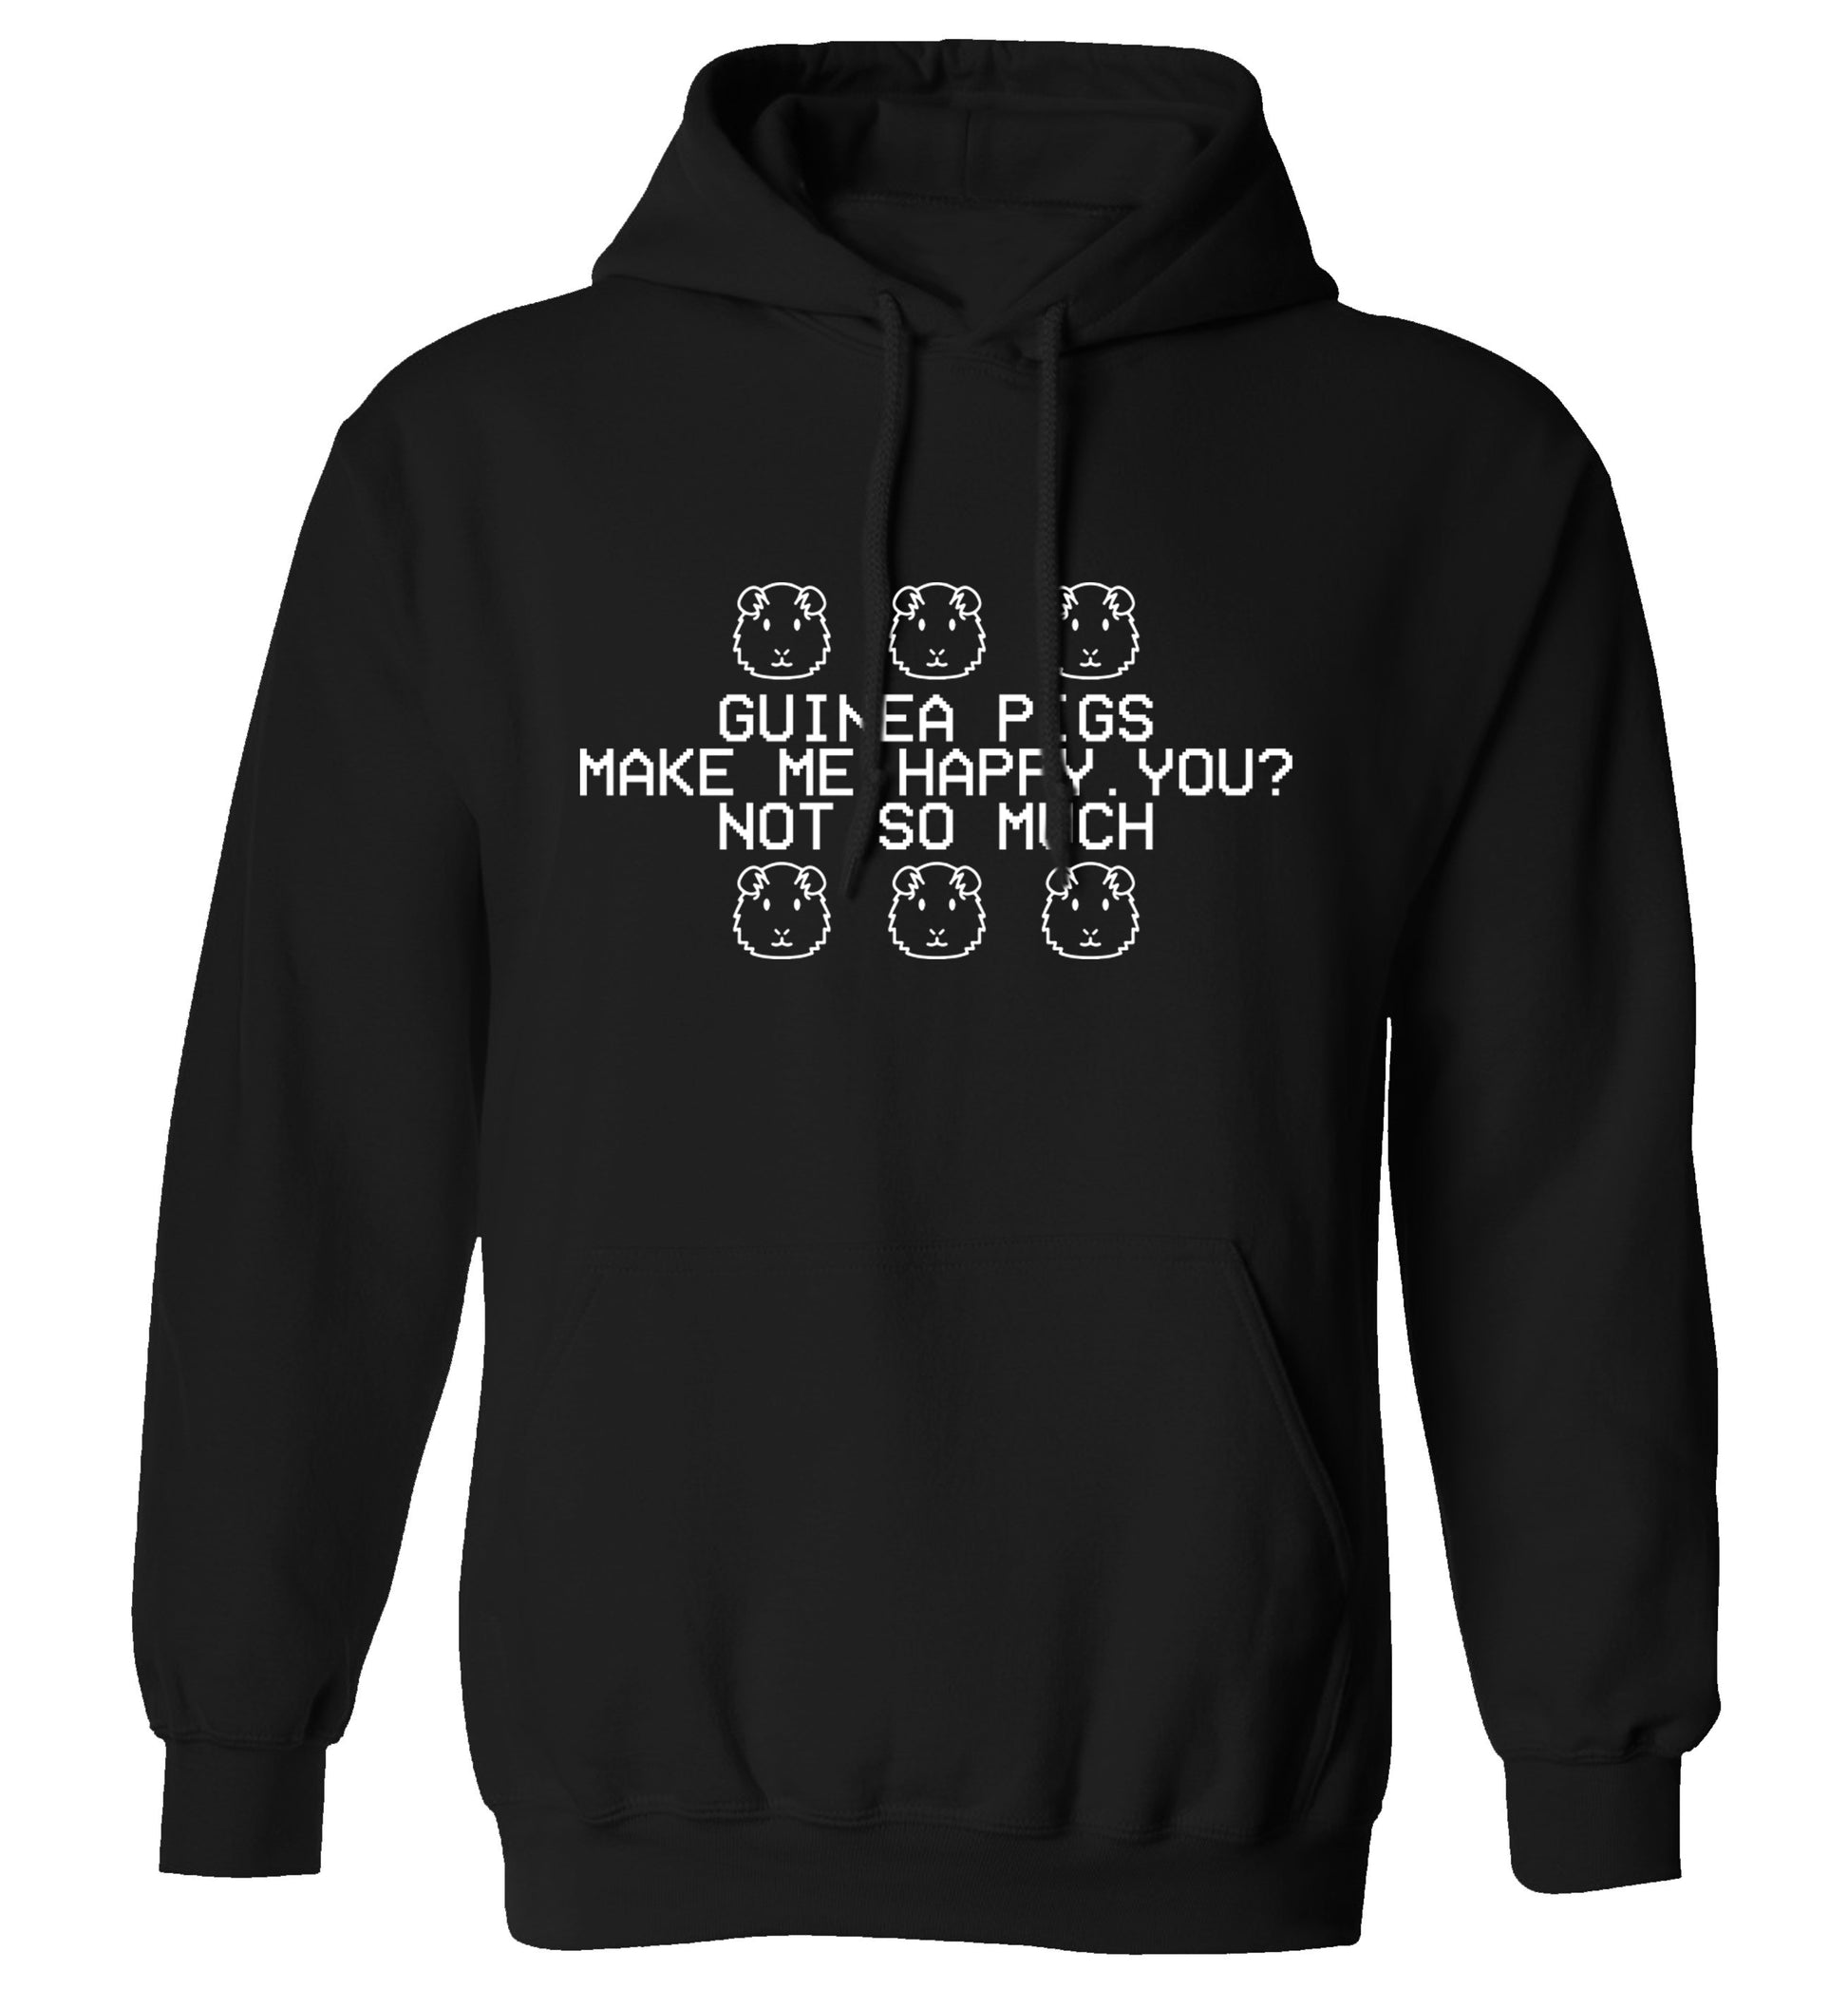 Guinea pigs make me happy, you not so much adults unisex black hoodie 2XL